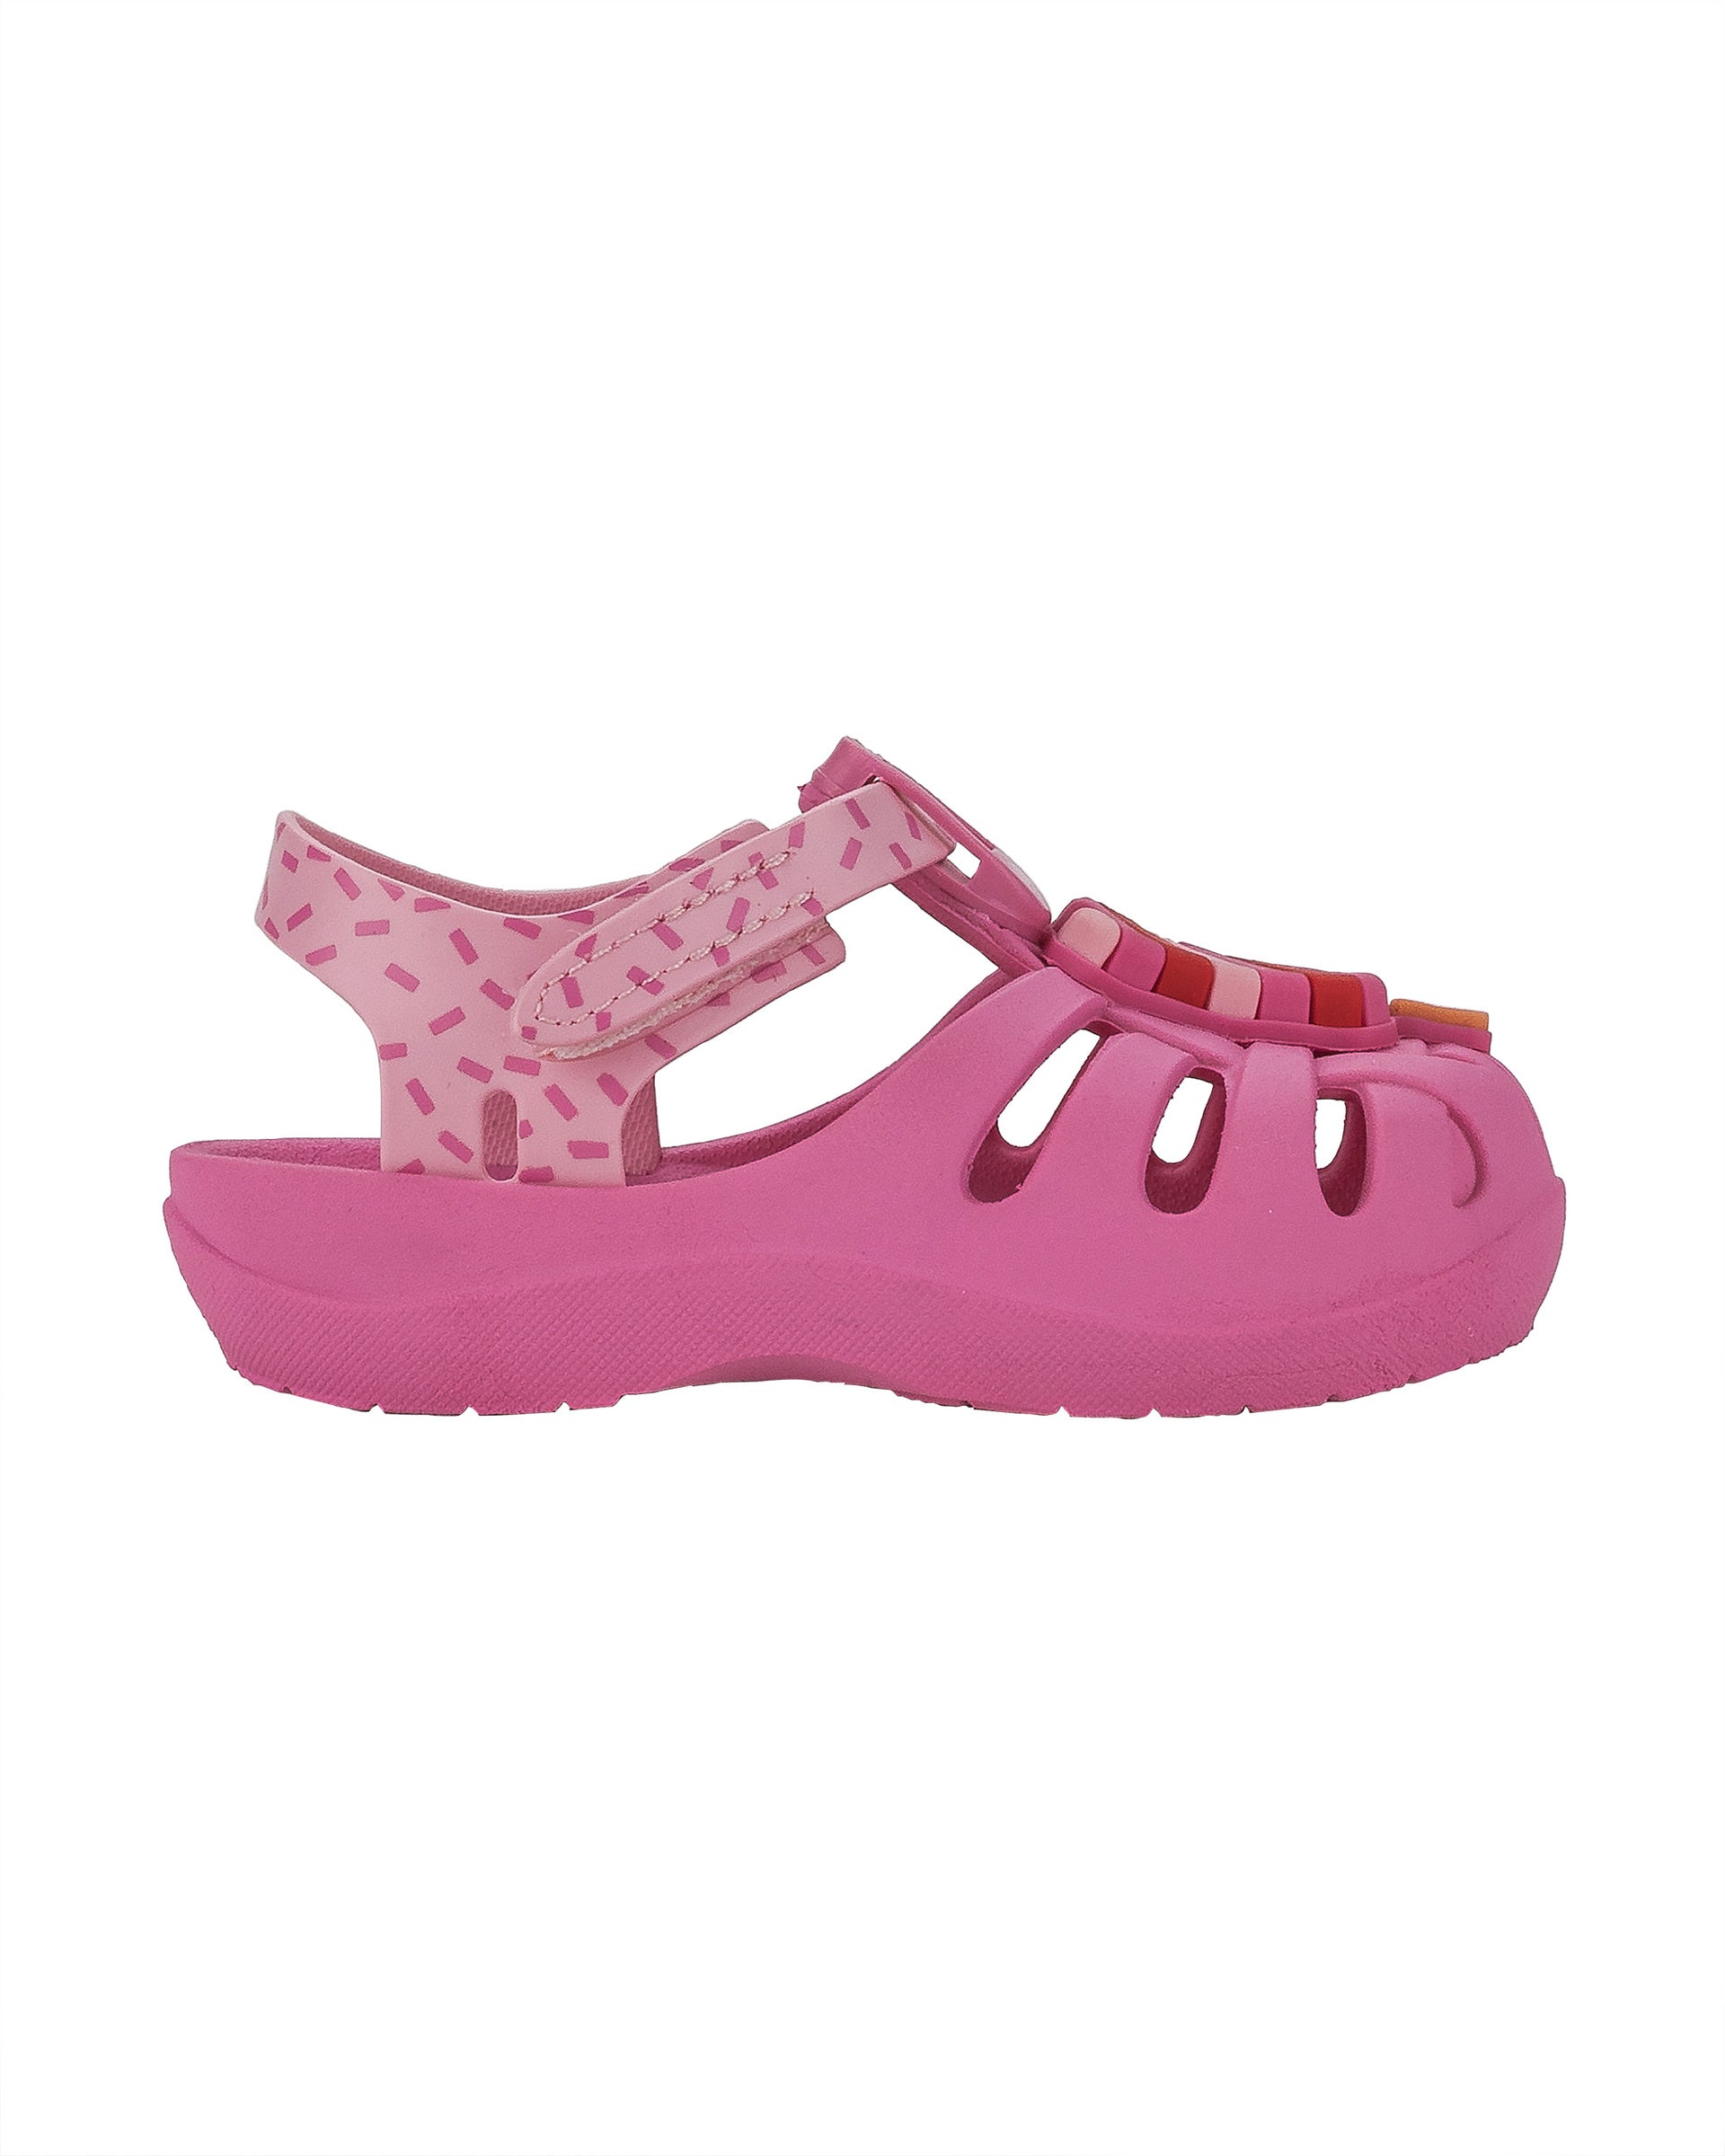 Outer side view of a pink Ipanema Summer baby fisherman sandal with a popsicle on the upper.